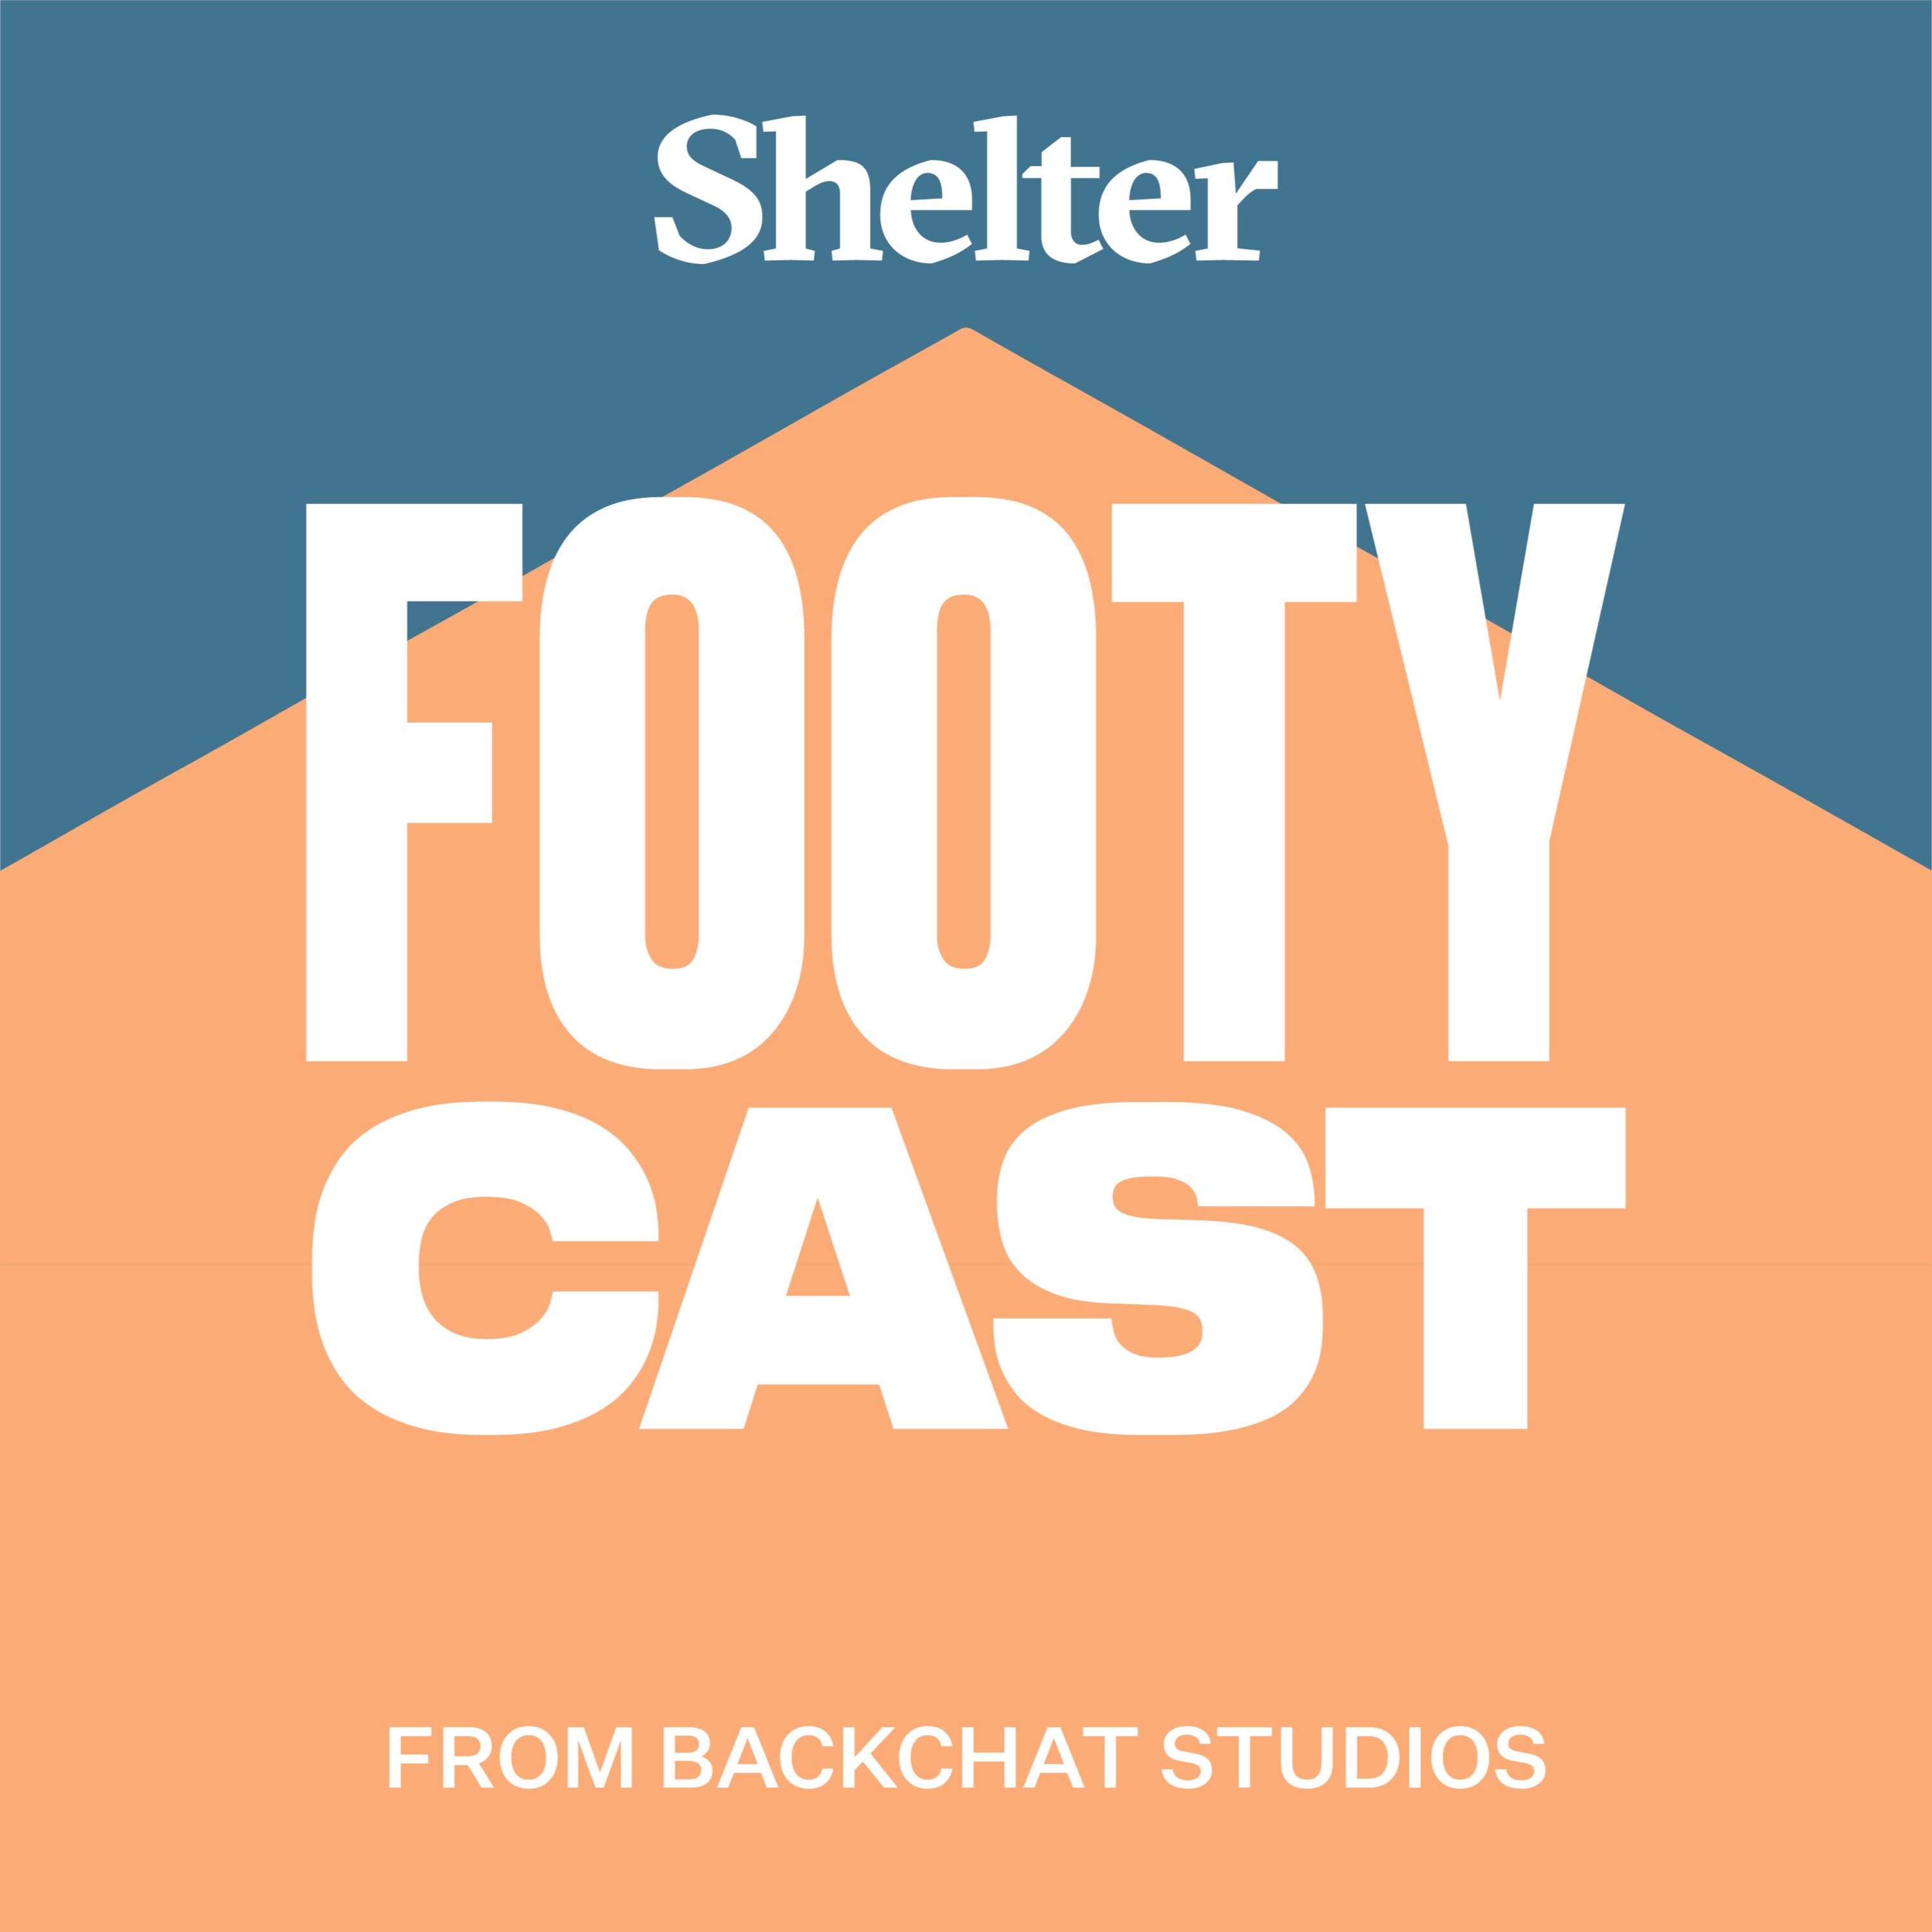 Shelter FootyCast Round 16 REVIEW